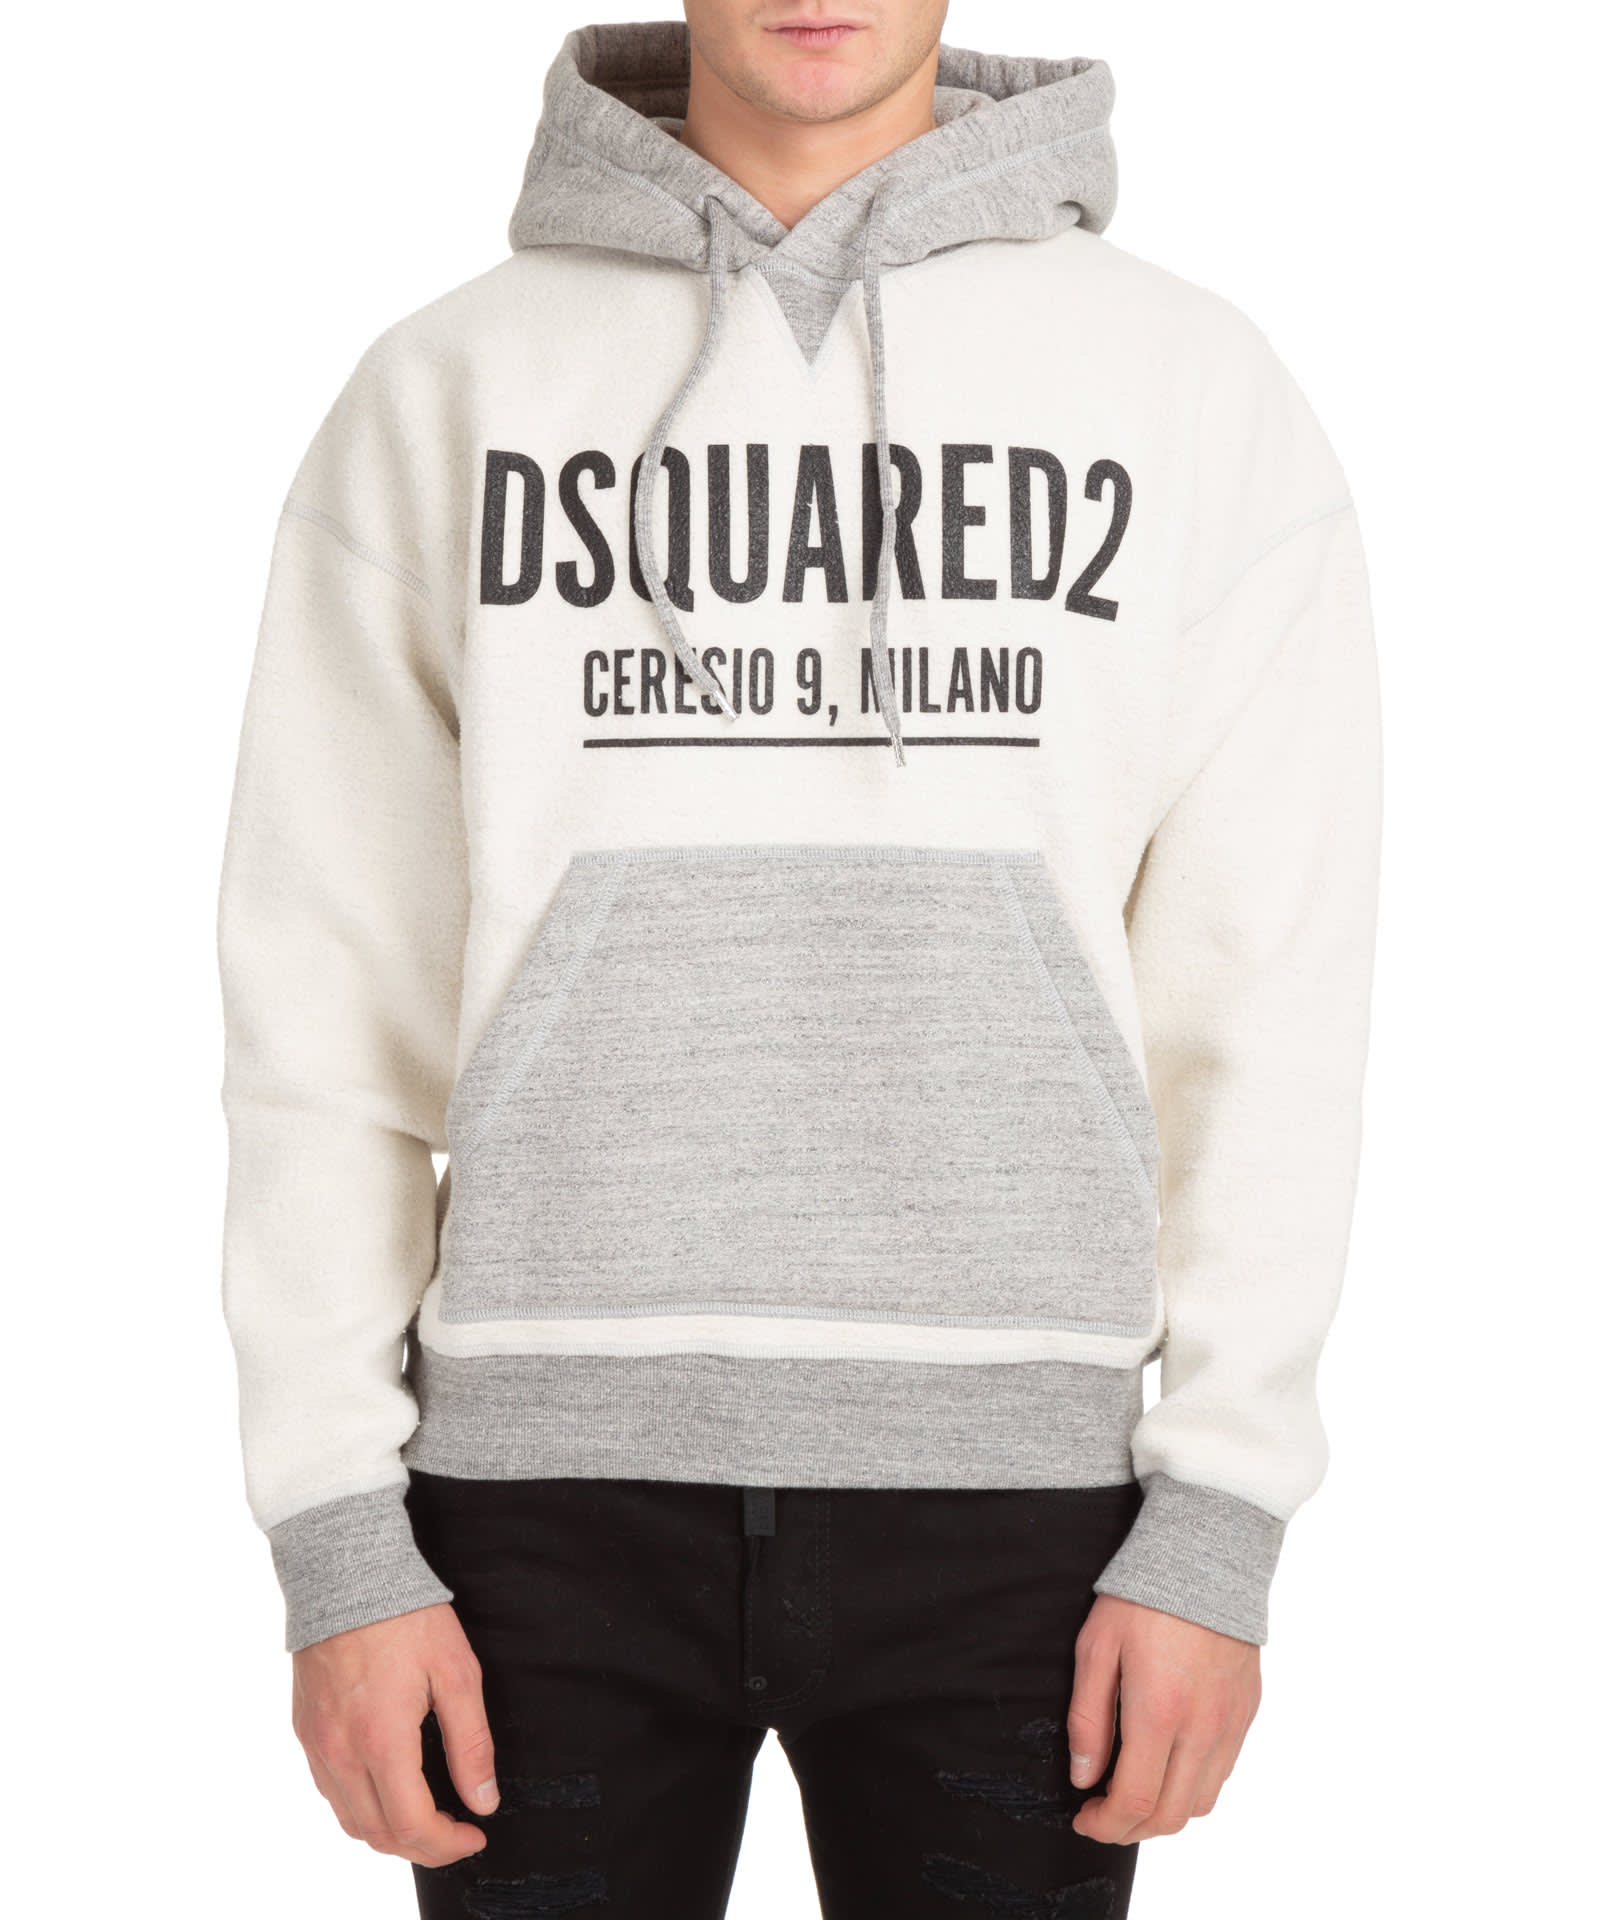 Dsquared2 Ceresio9 Mike Cotton Hoodie